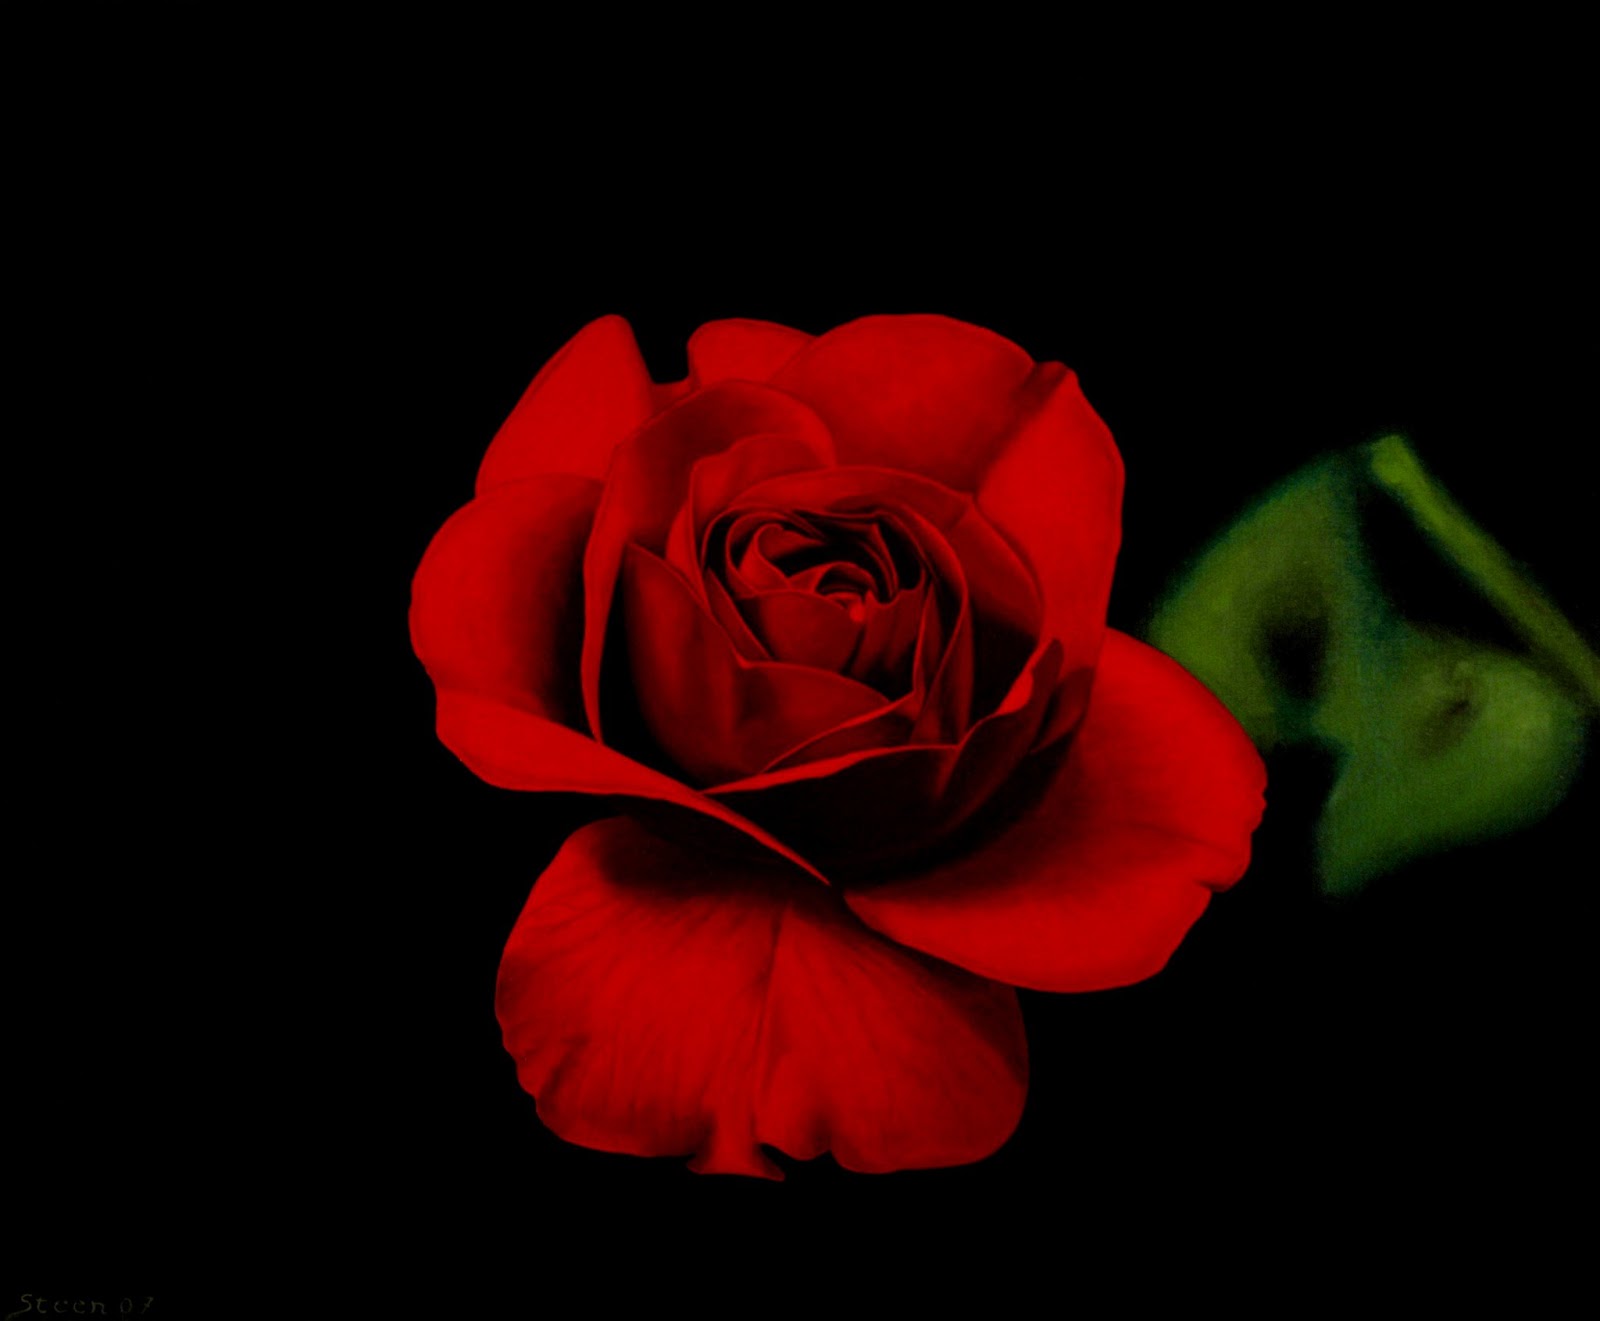 Black and Red Roses Red rose on black background oil